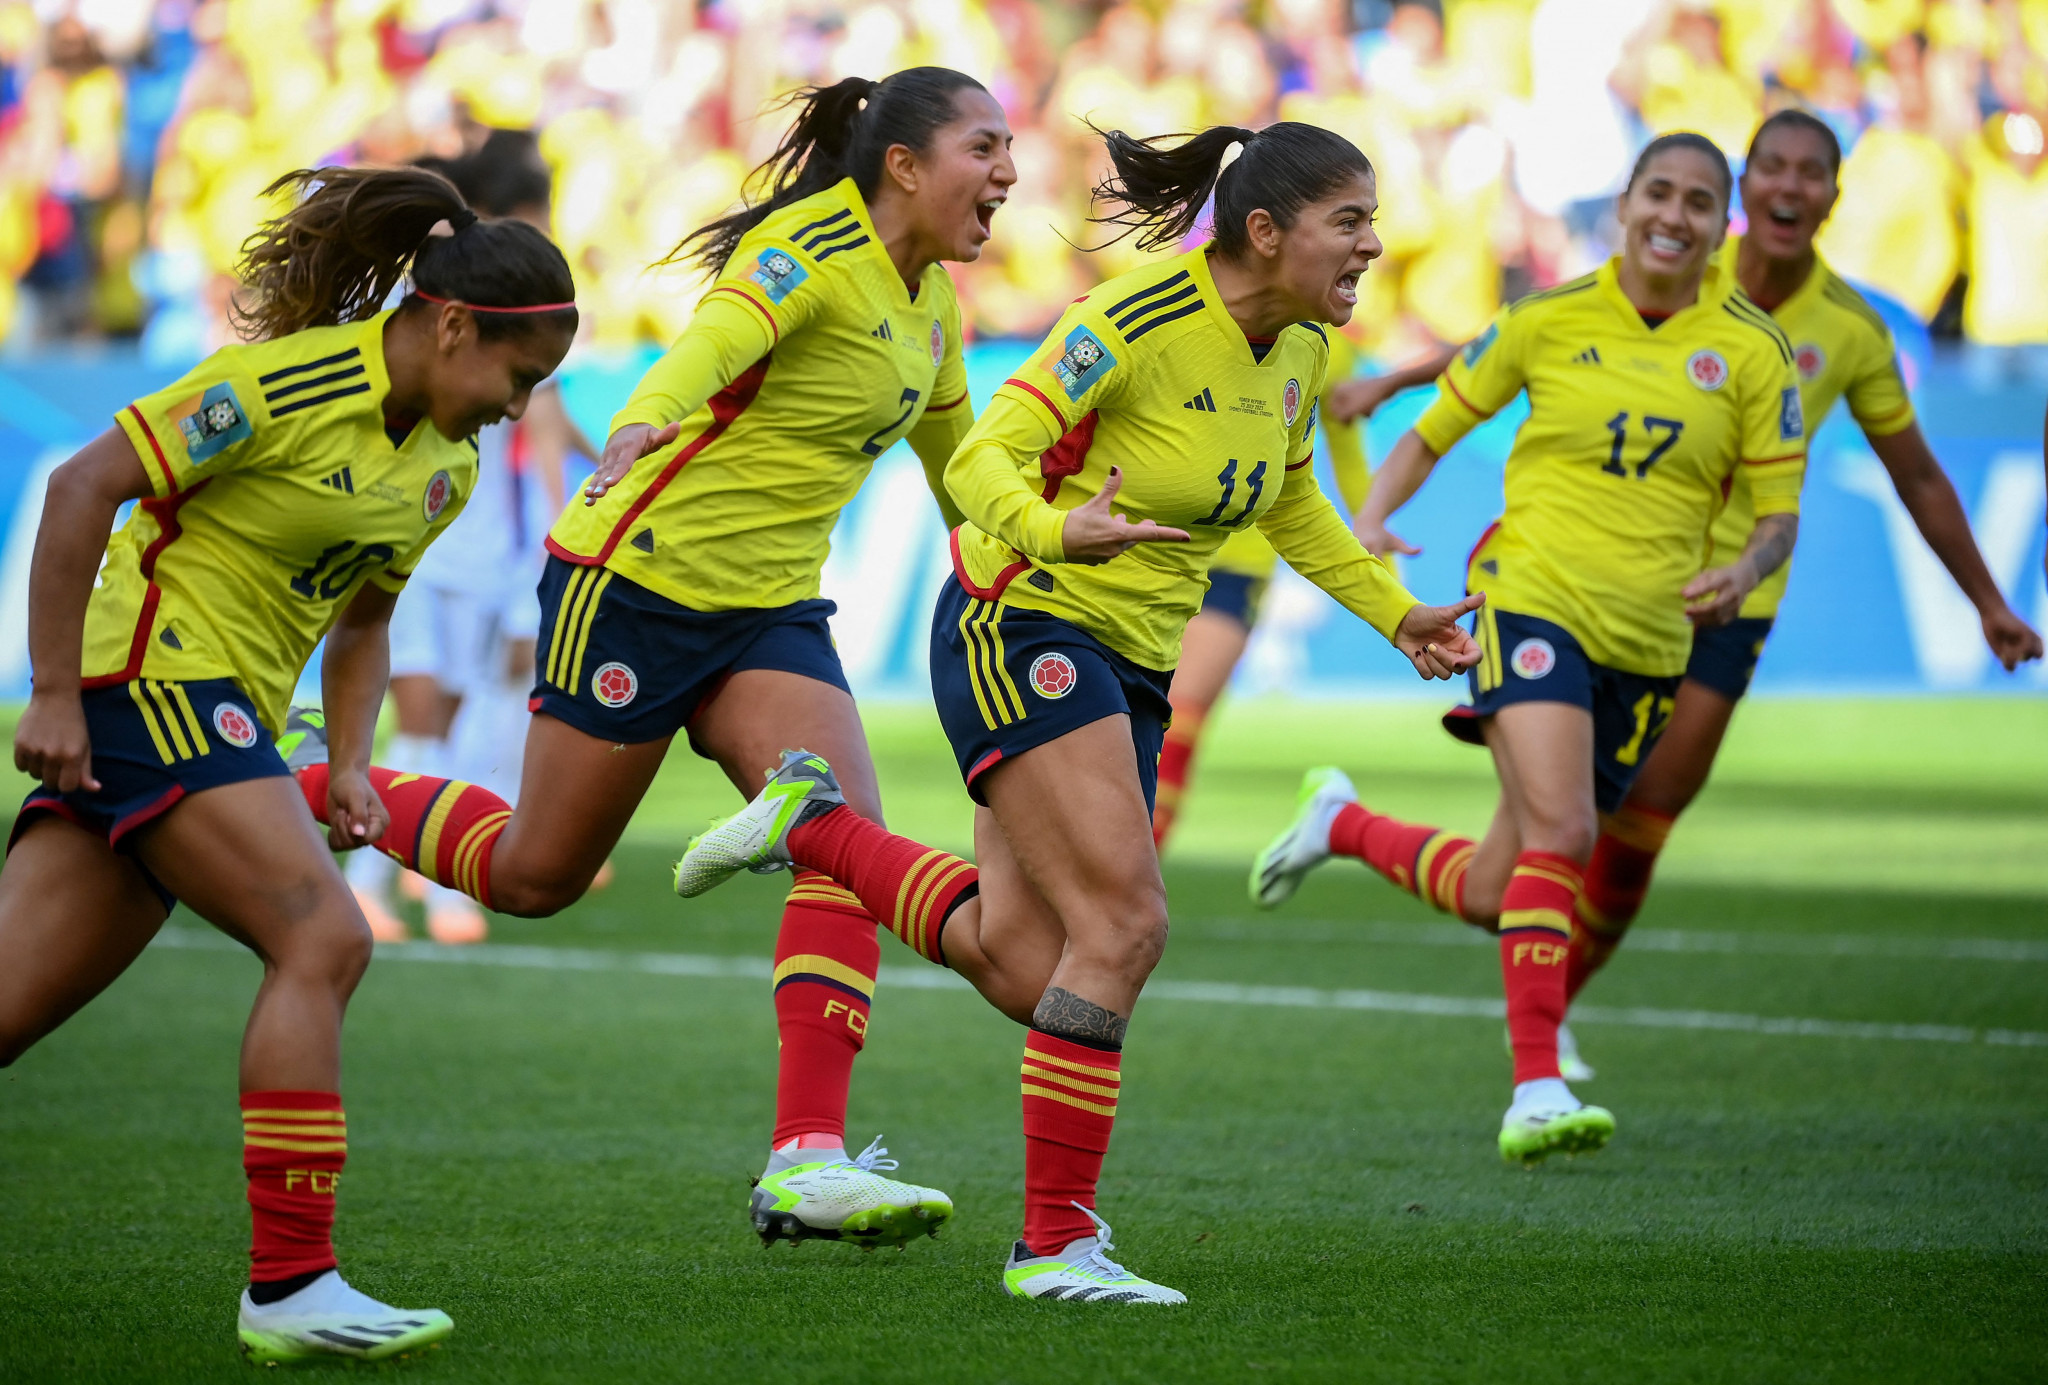 Colombia have joined Germany at the top of the Group H after what was their second ever Women's World Cup win ©Getty Images